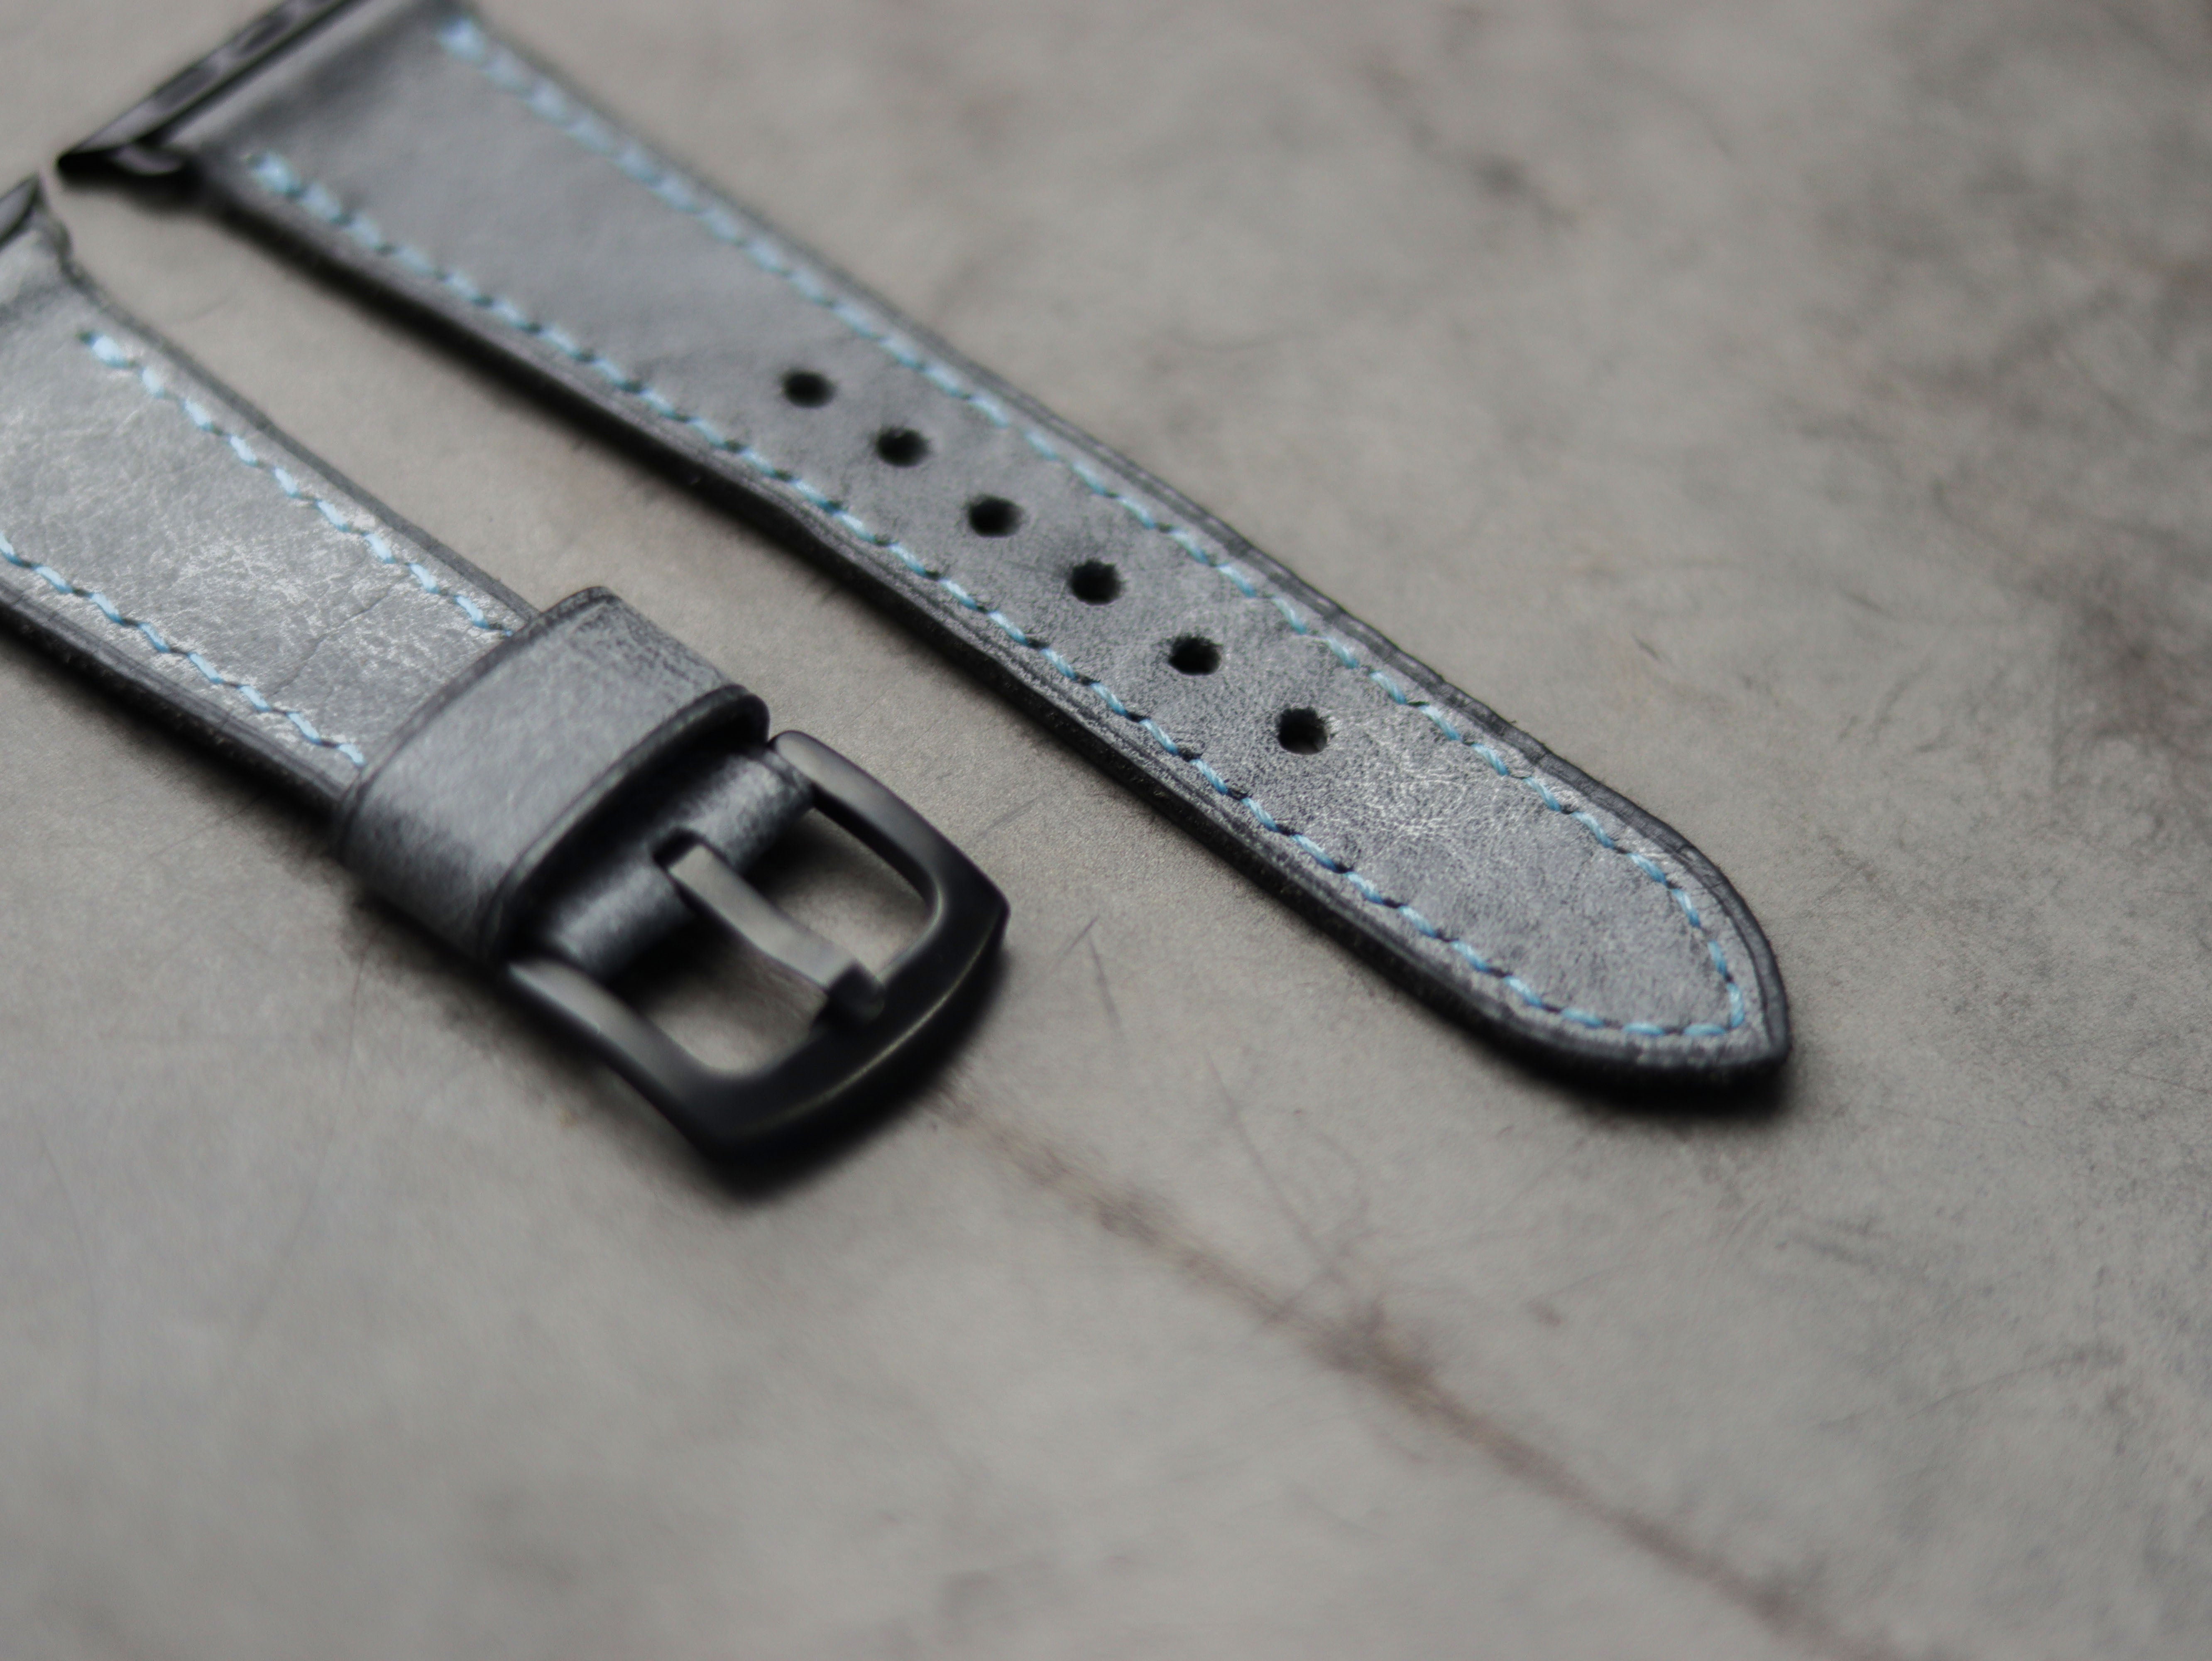 STONE BLUE LEATHER - APPLE WATCH STRAPS HAND-CRAFTED